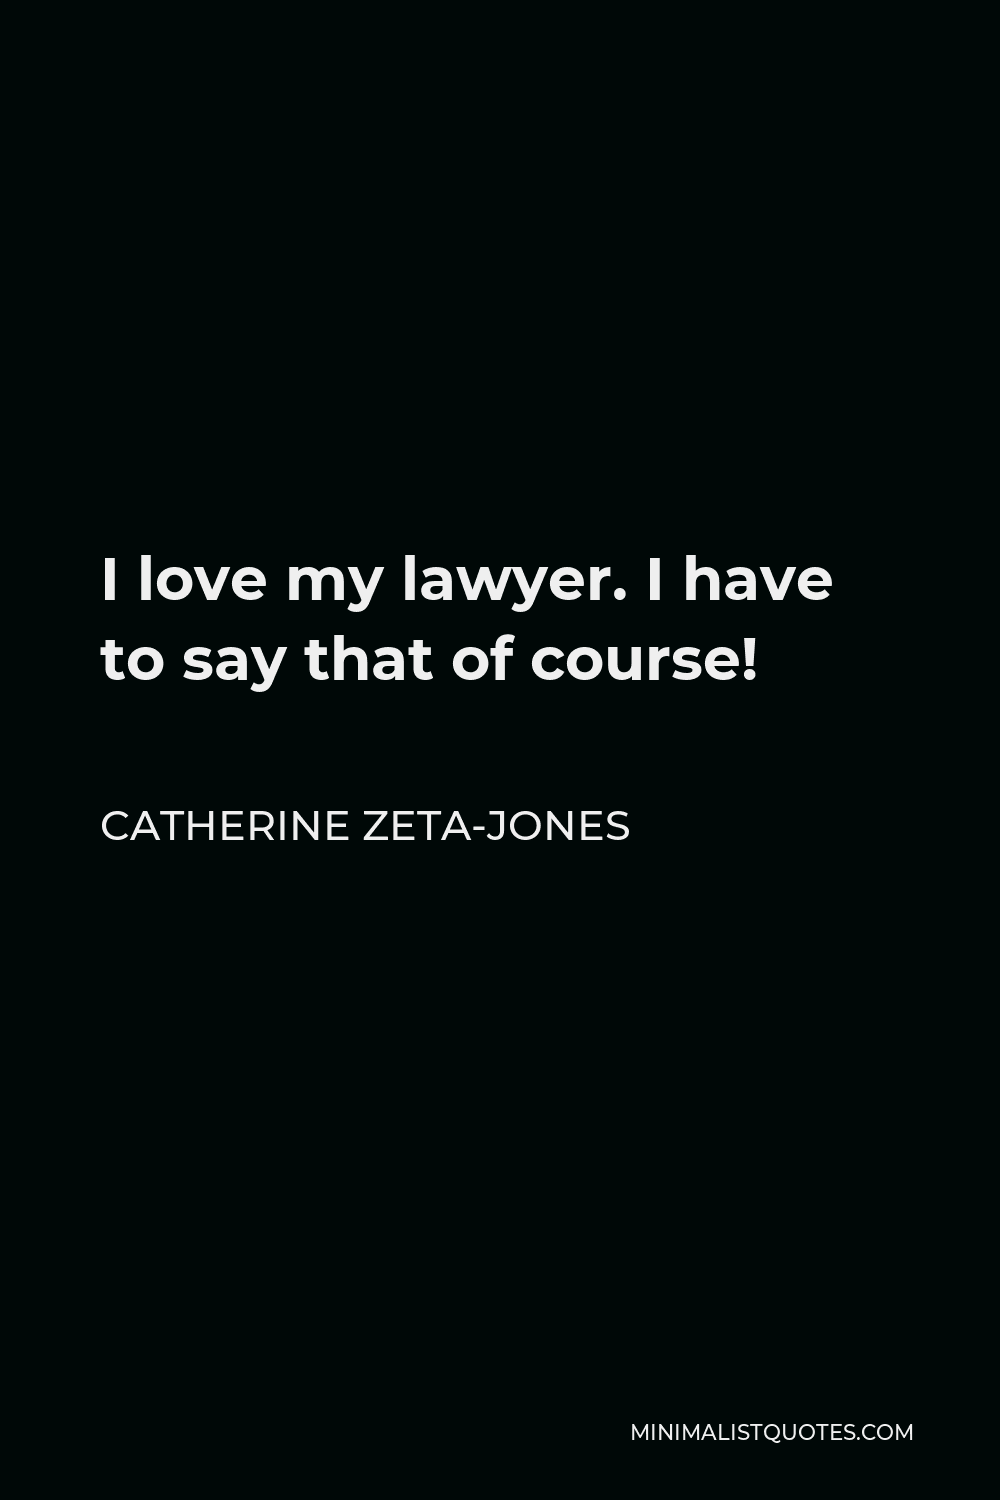 Catherine Zeta-Jones Quote - I love my lawyer. I have to say that of course!